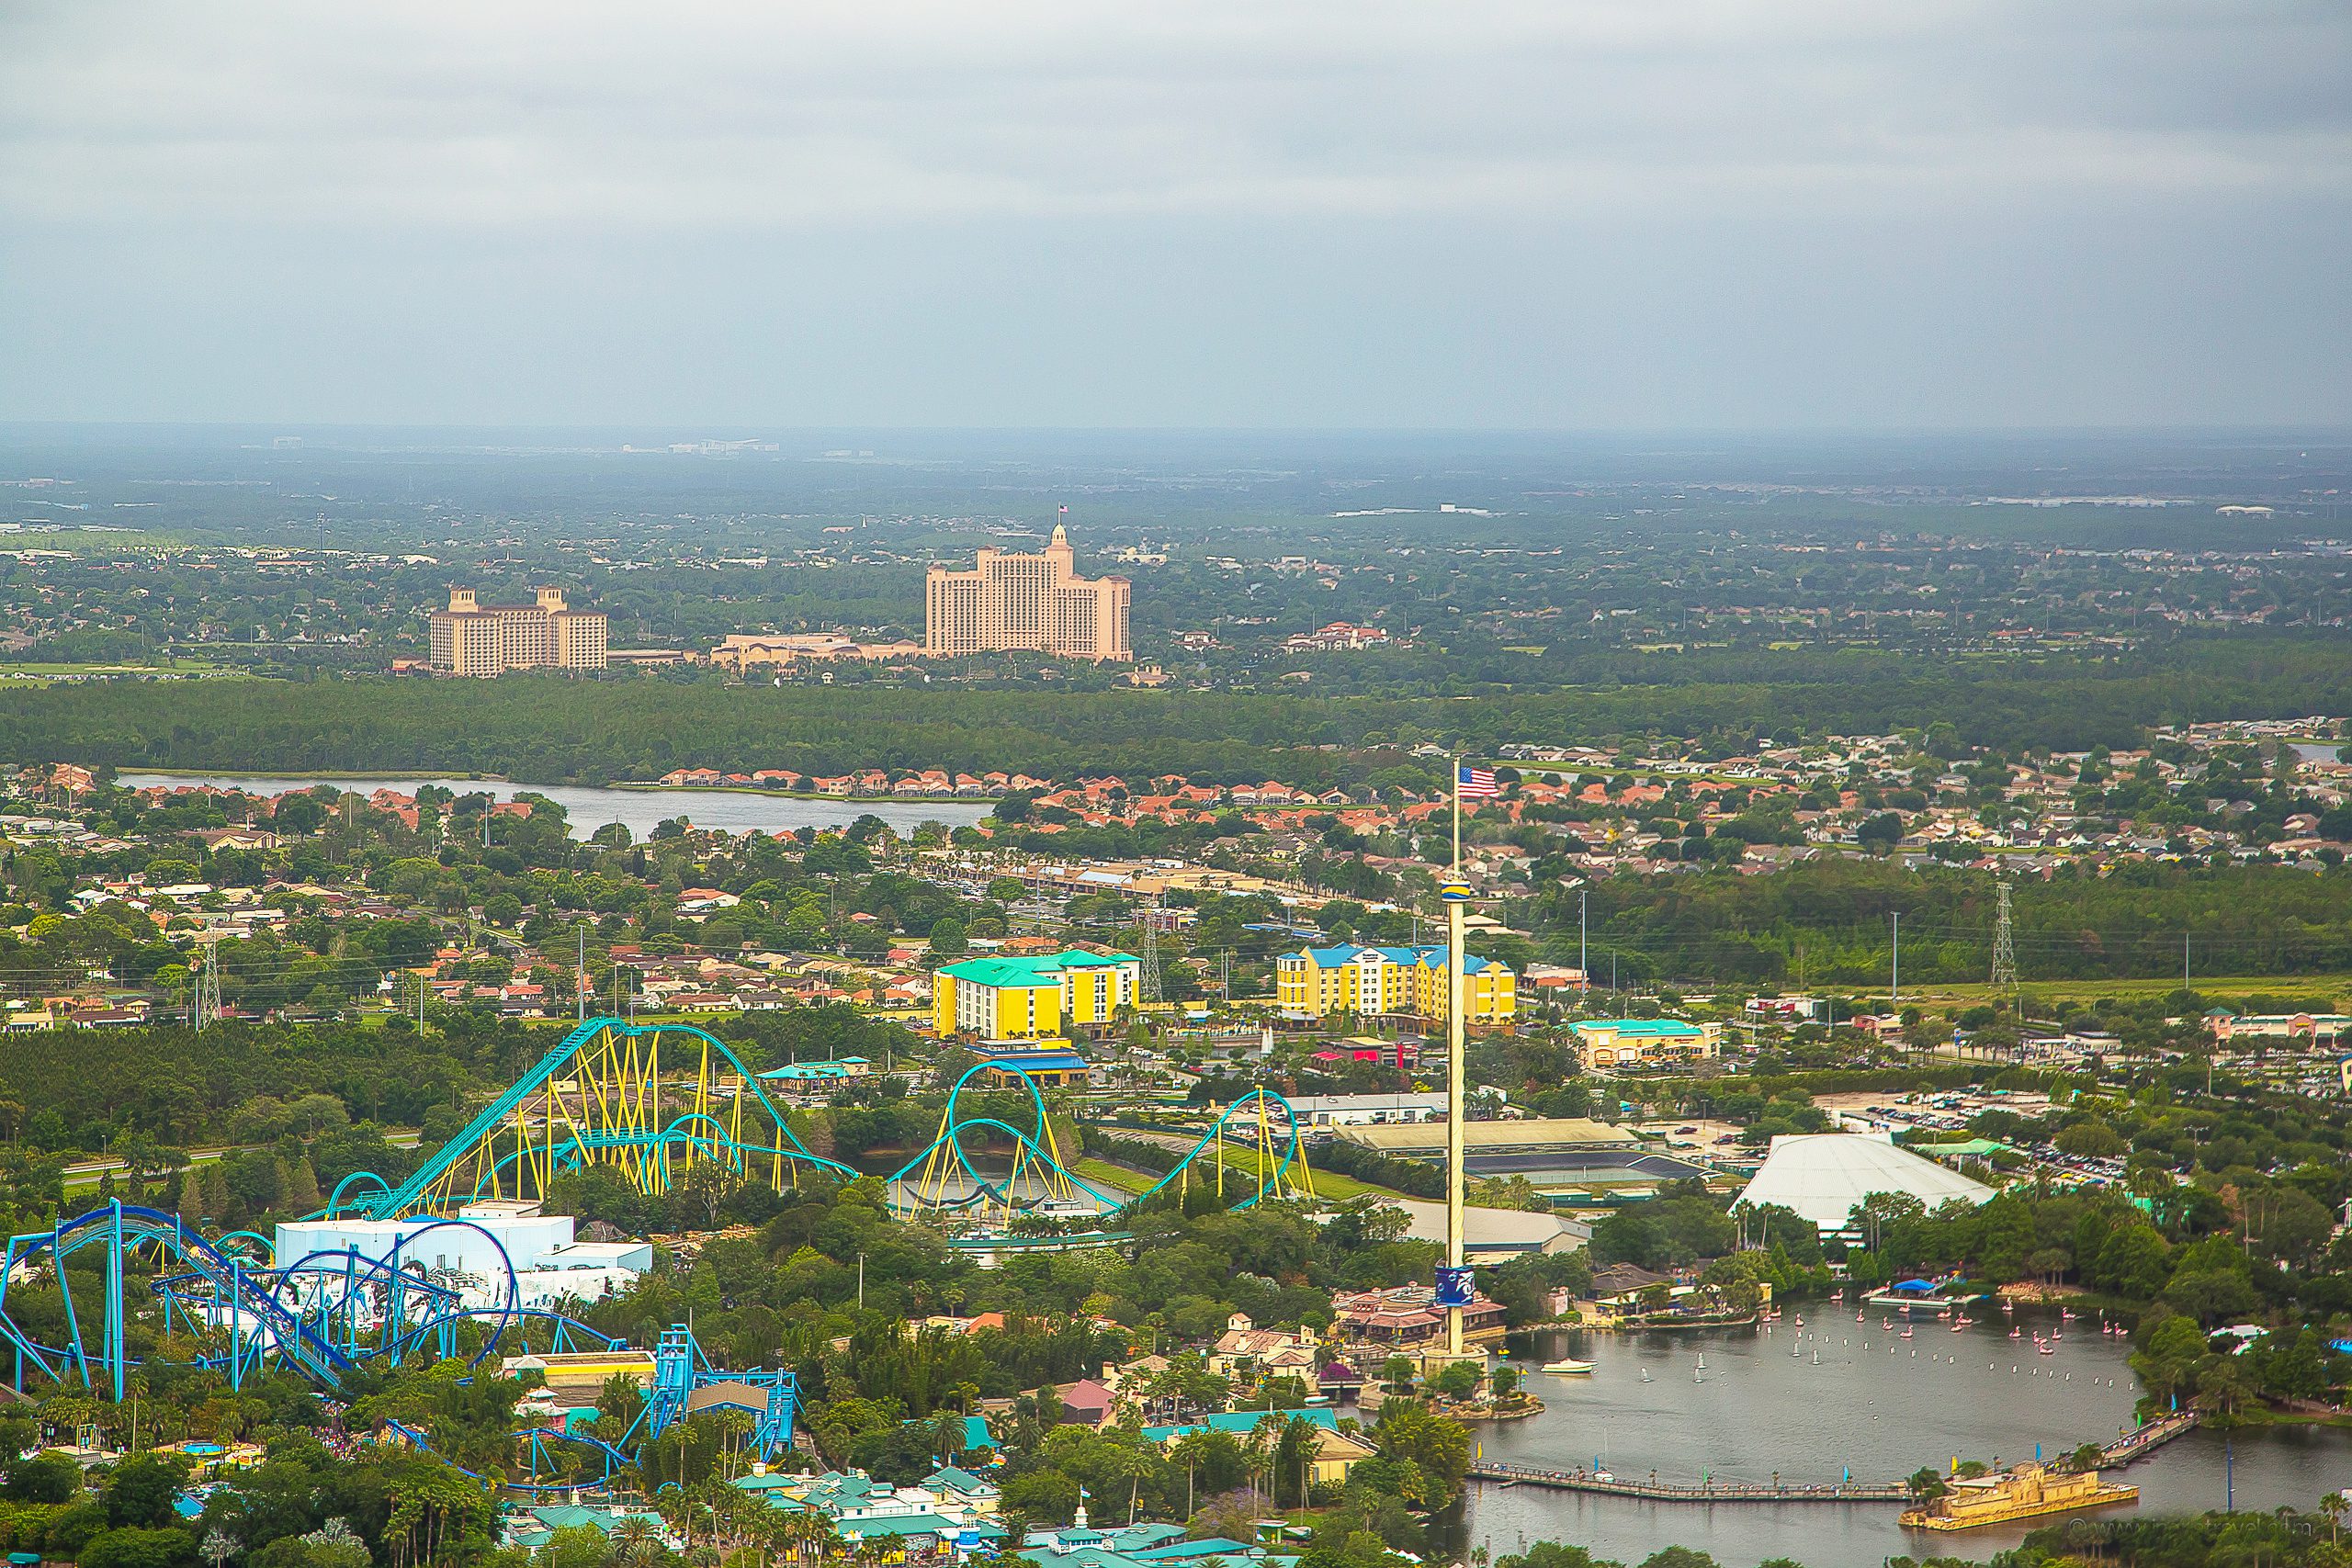 What’s New to See, Do and Dine at Around the Orlando and Kissimmee, Florida Area for 2023